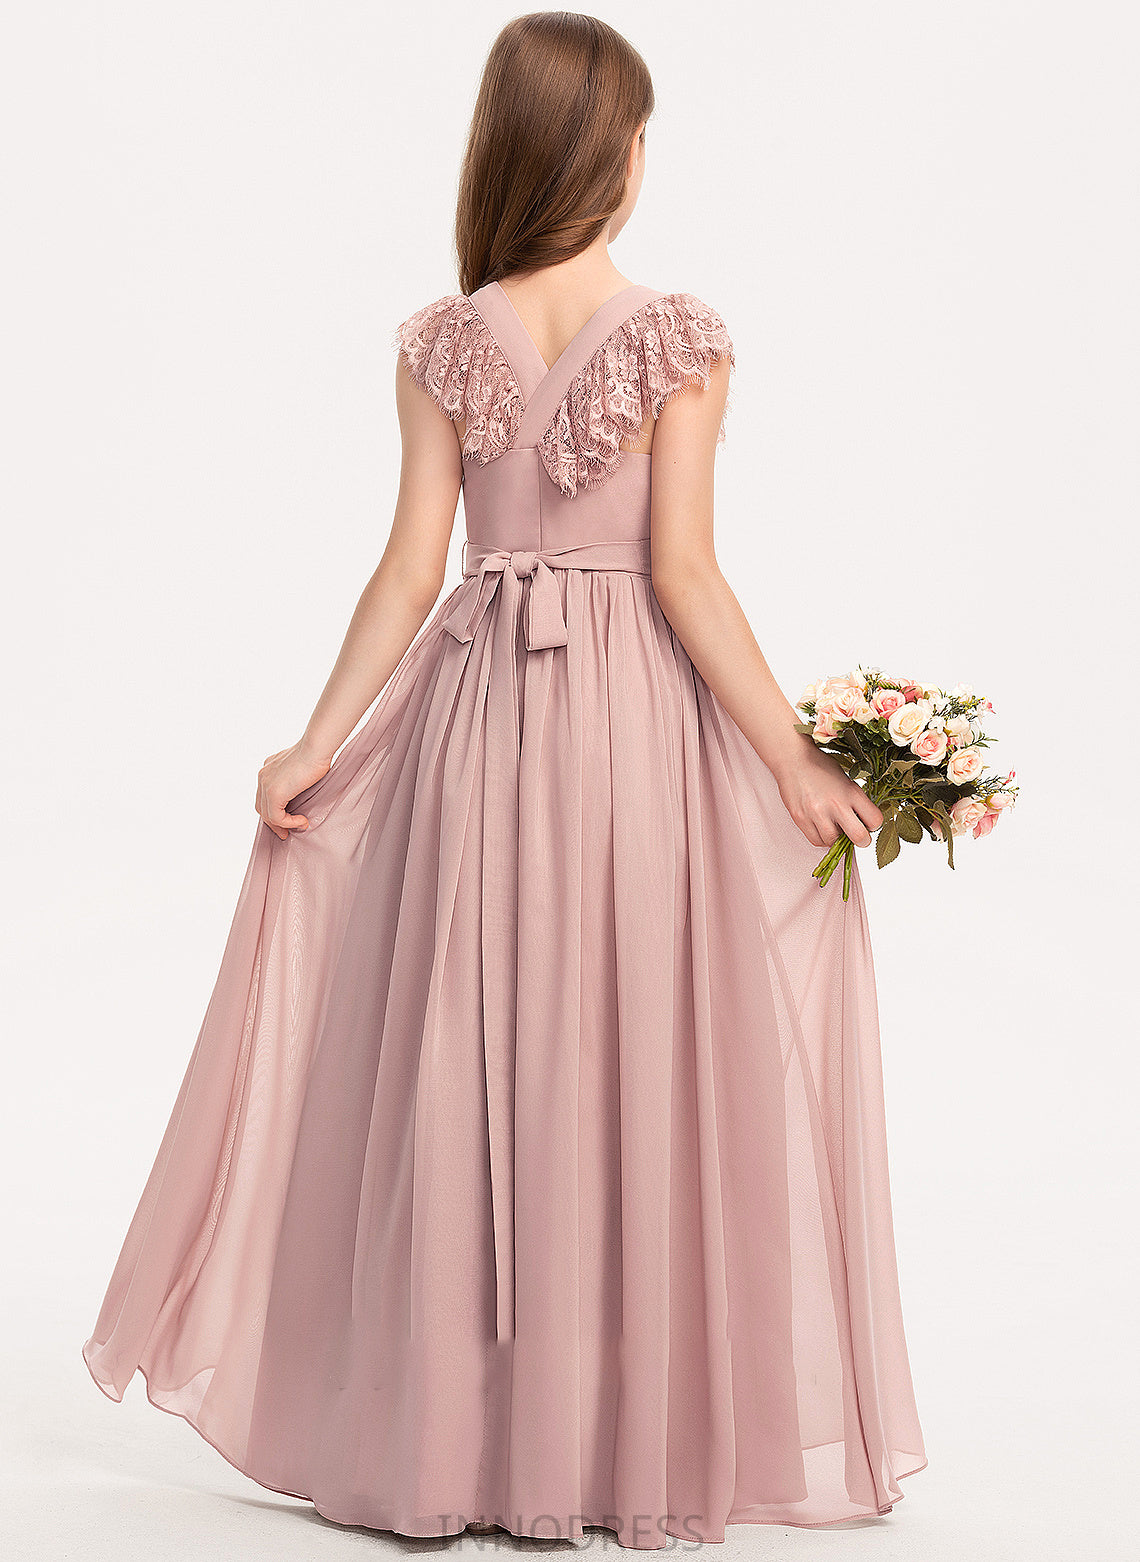 Scoop Junior Bridesmaid Dresses Bow(s) Chiffon A-Line Mareli With Lace Floor-Length Neck